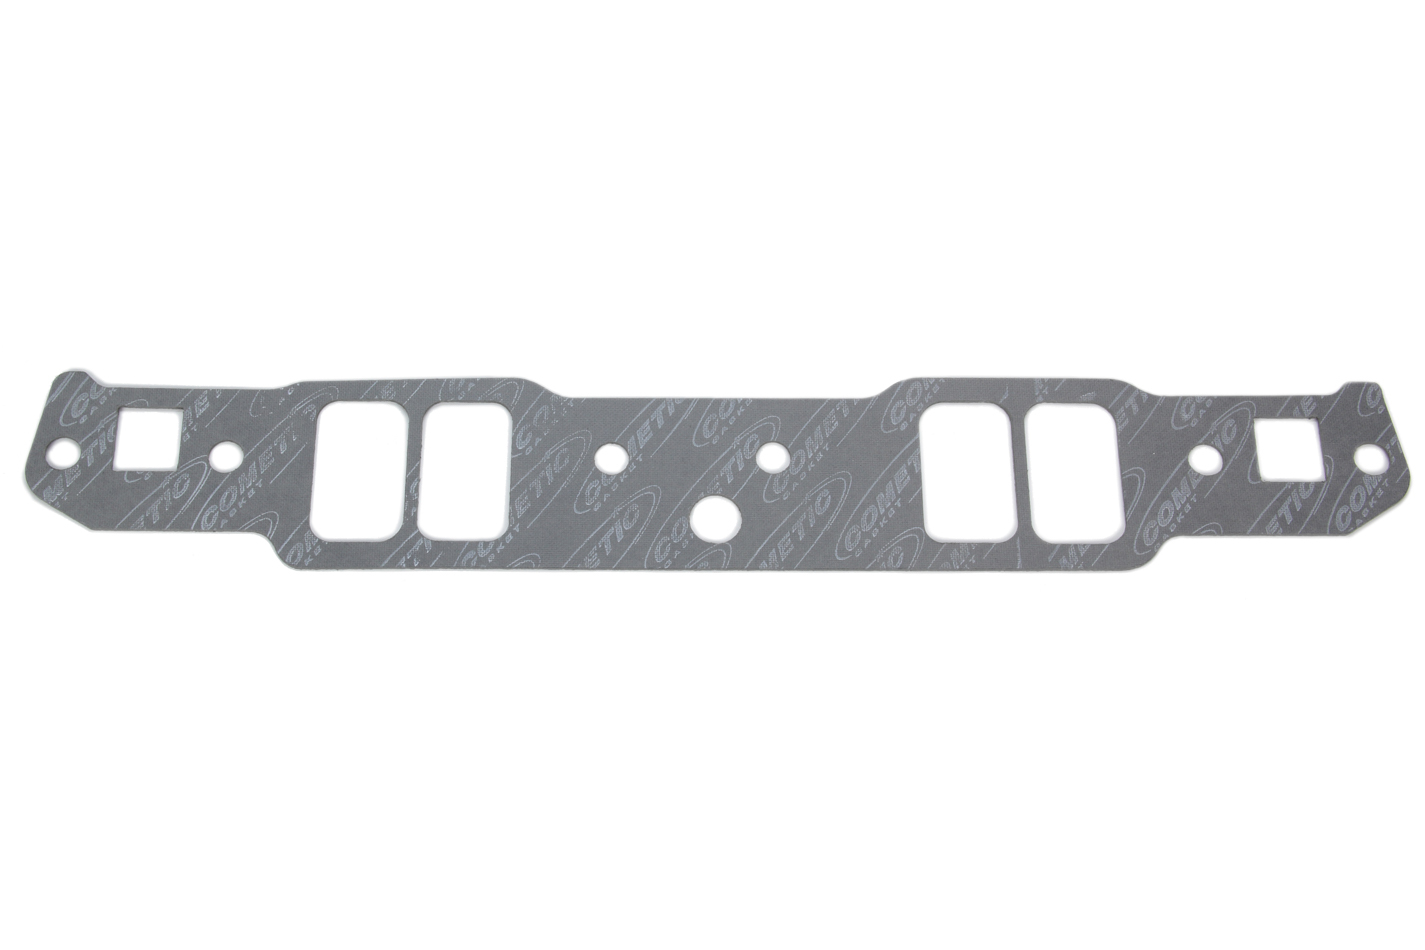 Brodix COC3250 - Intake Manifold Gasket, 0.060 in Thick, Composite, 1.361 x 2.231 in Rectangular Port, Small Block Chevy, Each